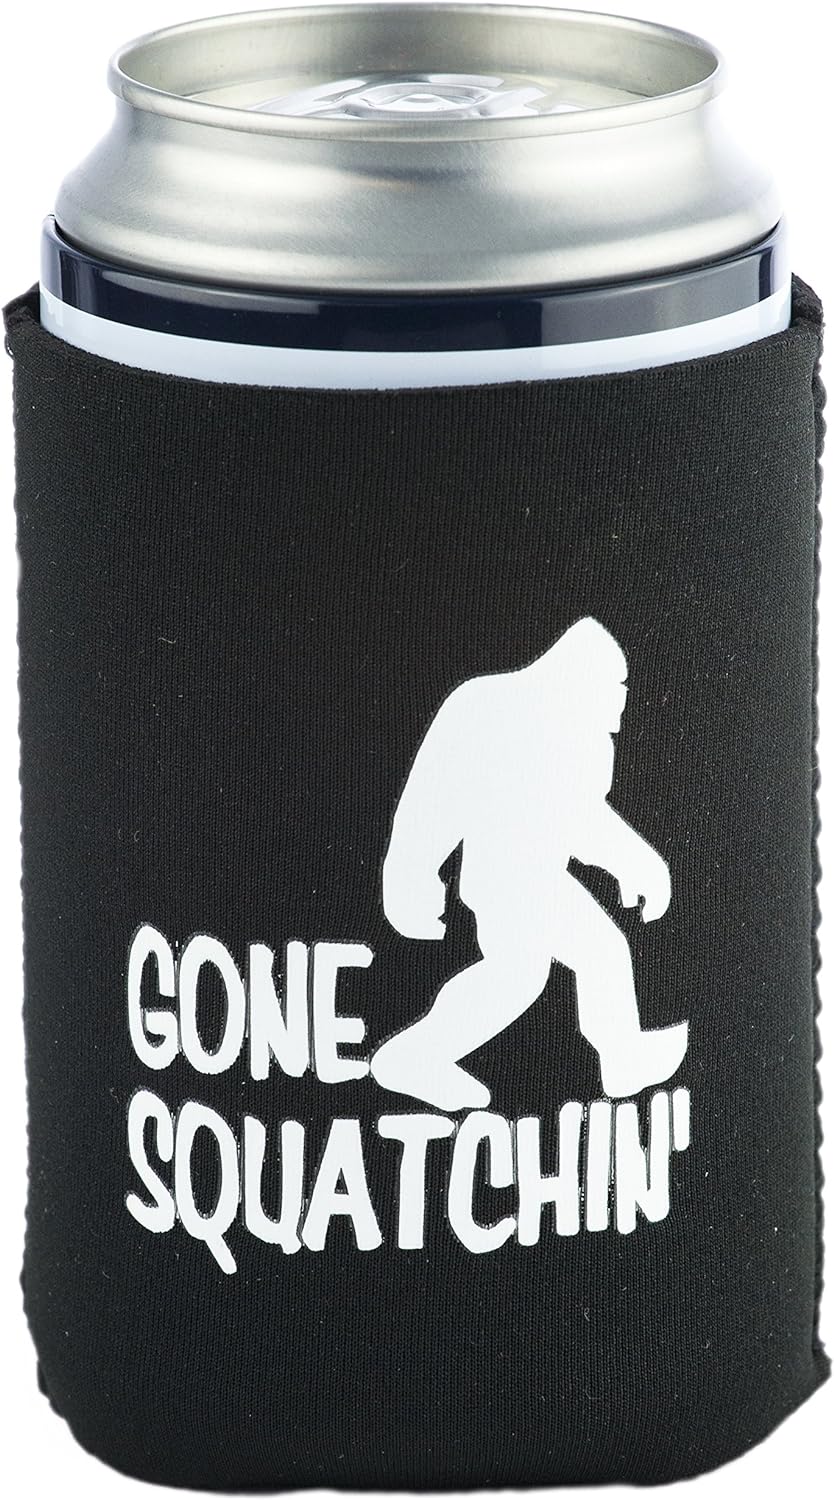 Funny Guy Mugs Sasquatch I Believe Collapsible Can Coolie